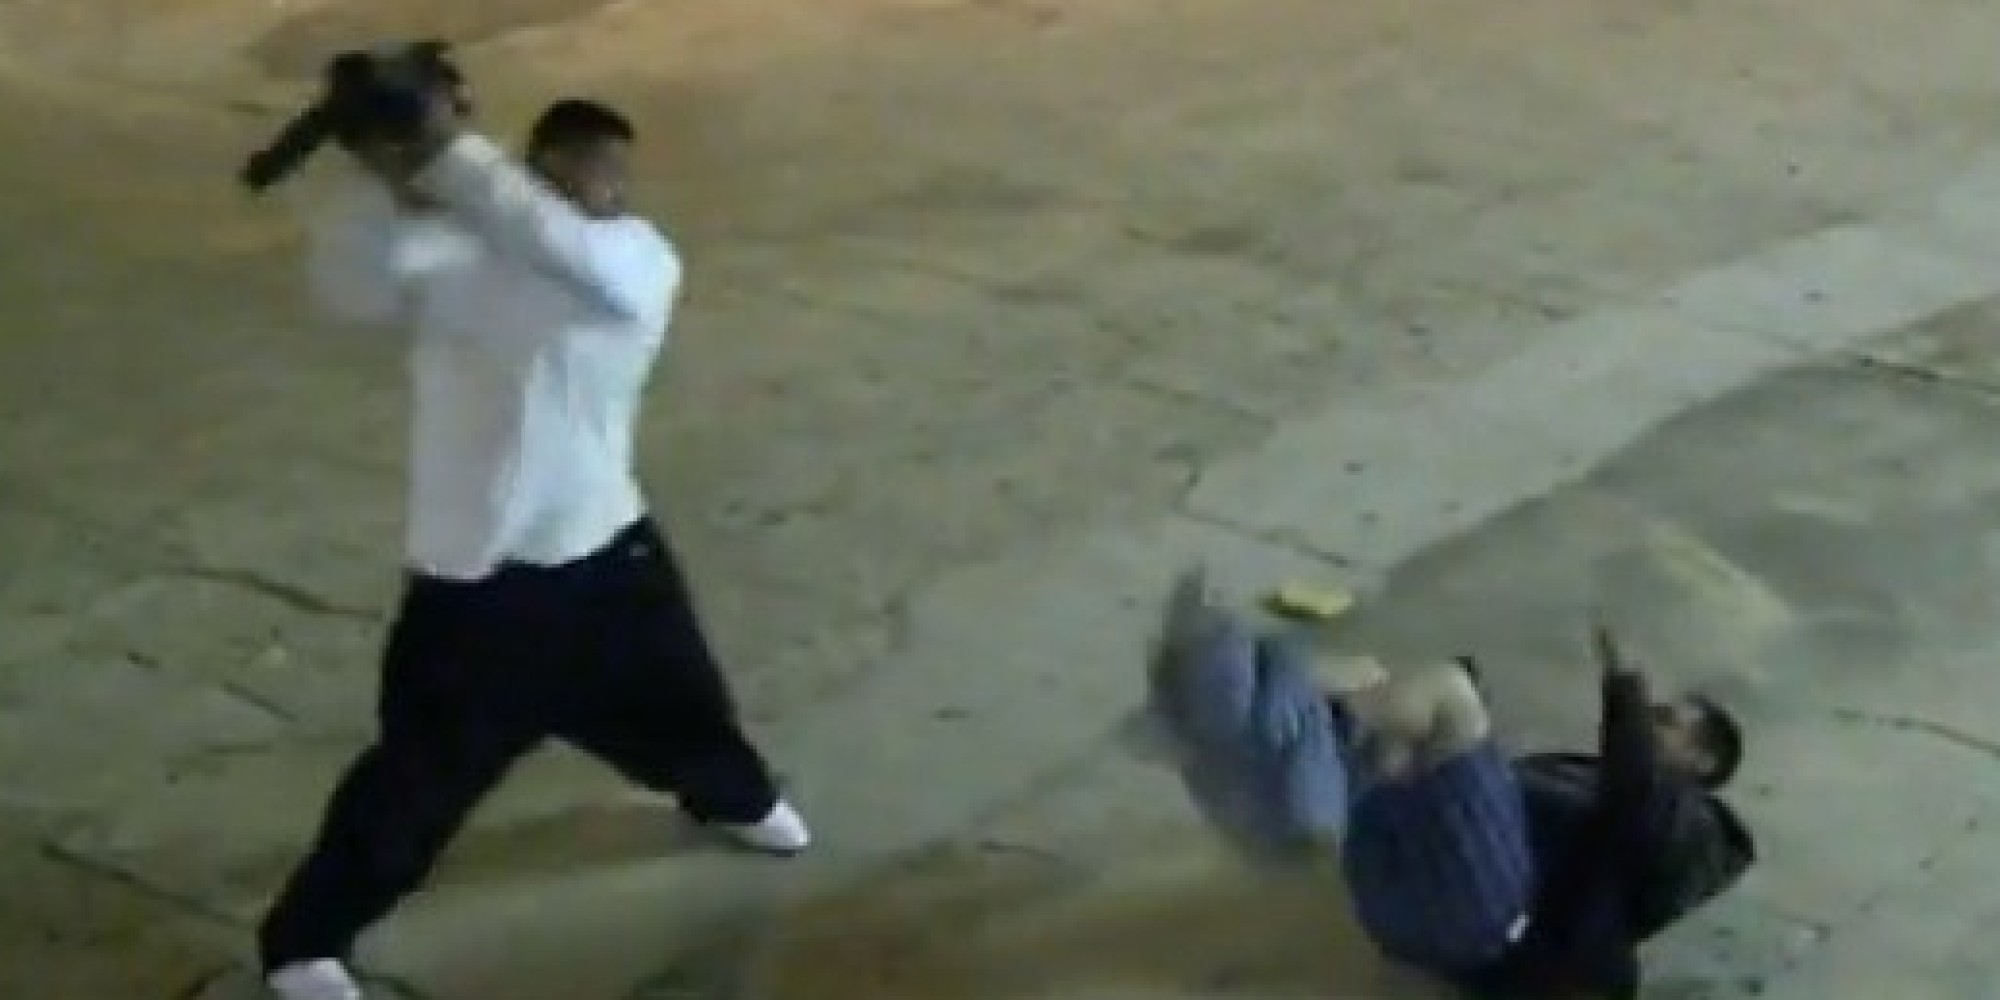 Brutal Beating Of Transient Captured On Video (GRAPHIC) | HuffPost